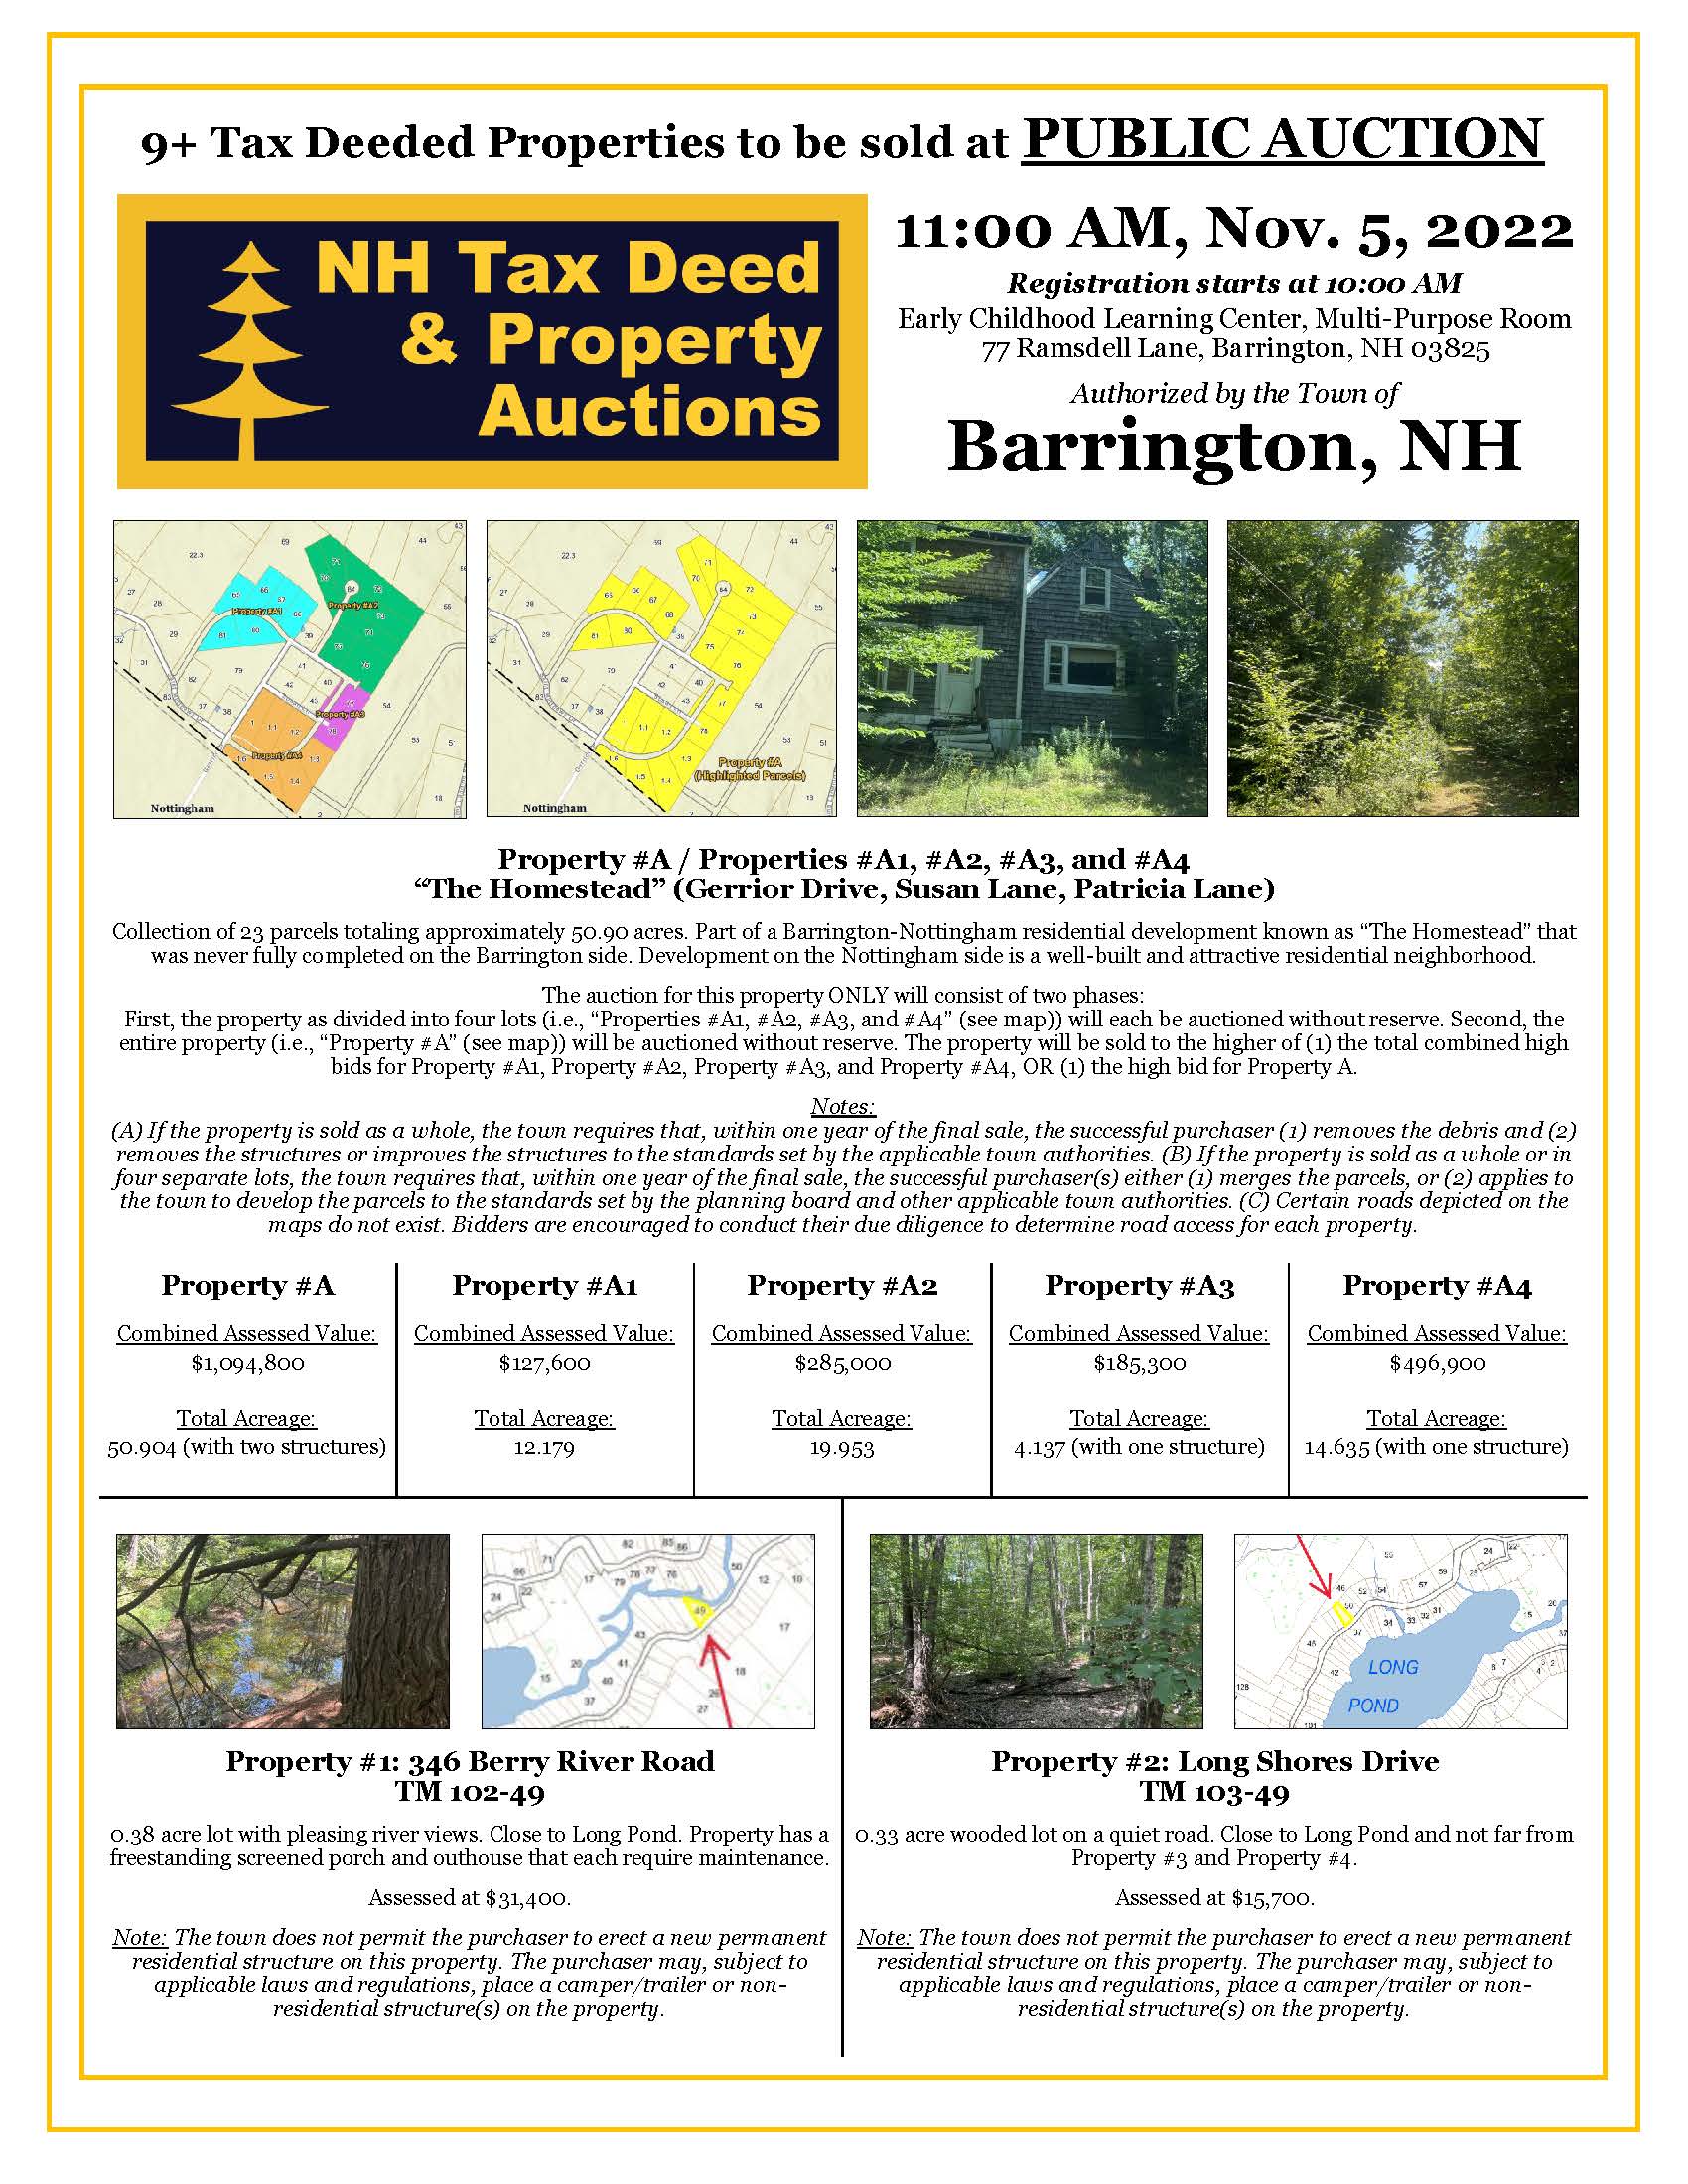 Barrington Land Sale Flyer, information available at nh Tax Deed &amp; Property Auction website